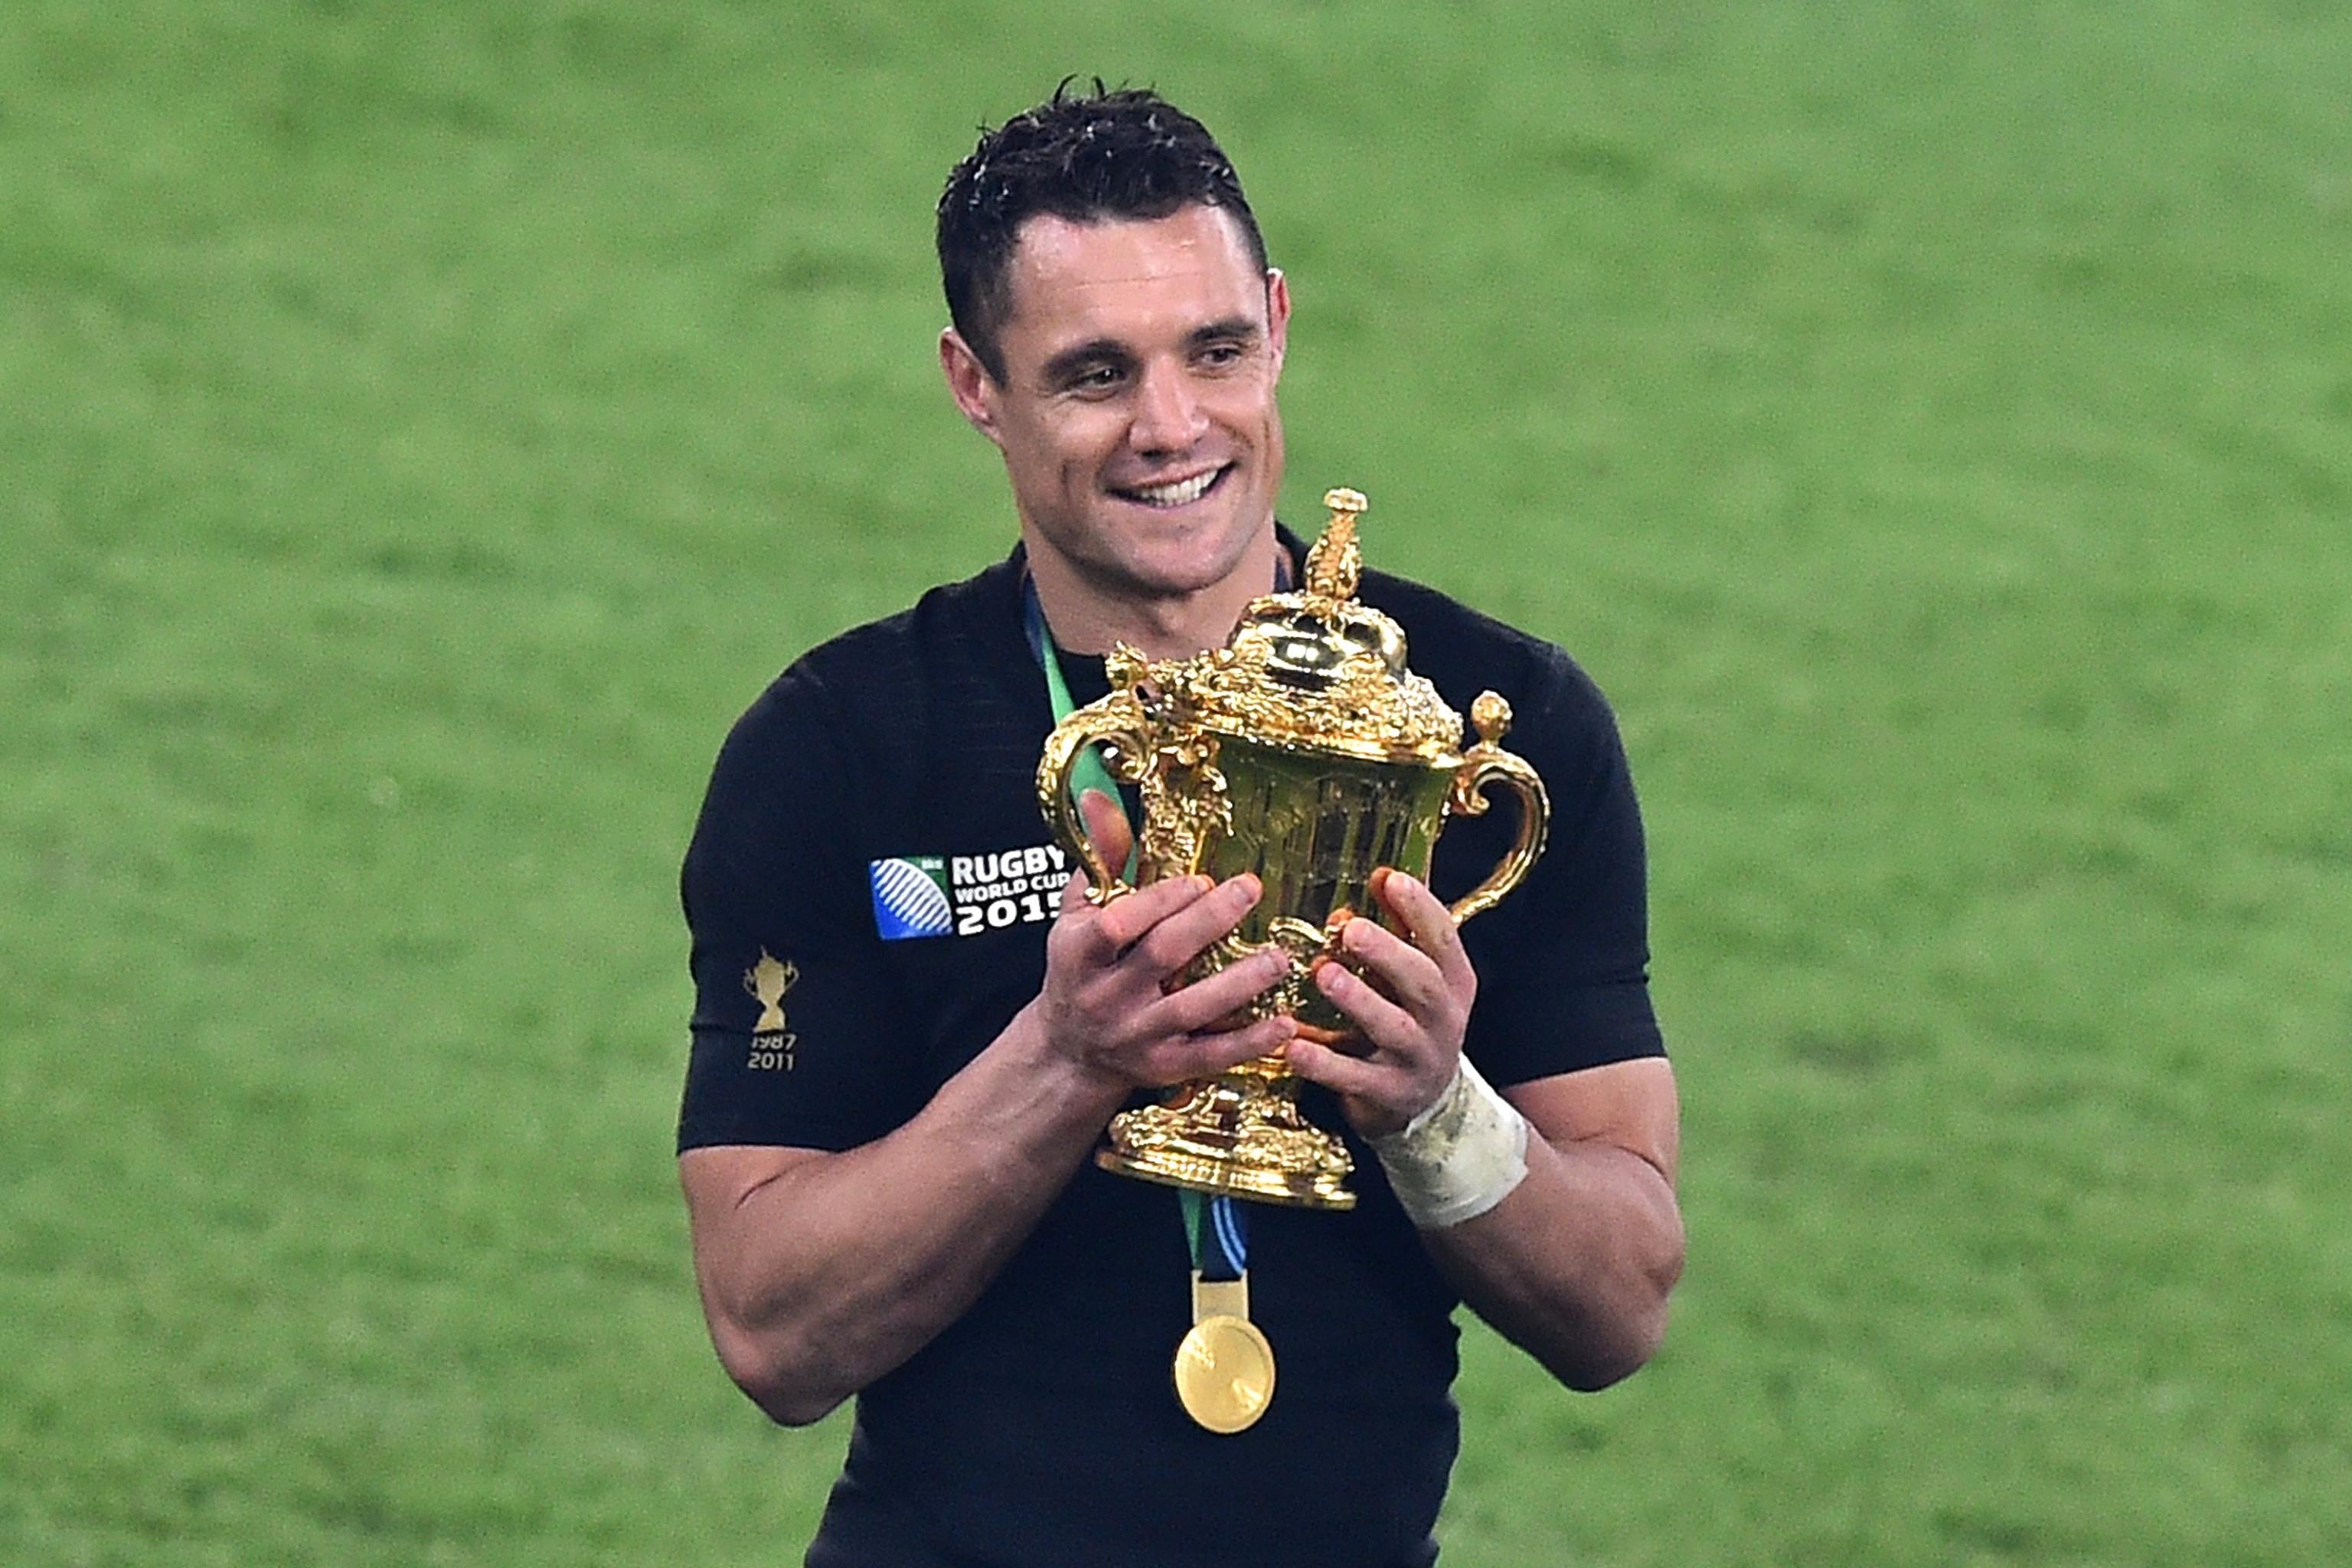 NZ rugby star Dan Carter reveals he was asked by the Patriots if